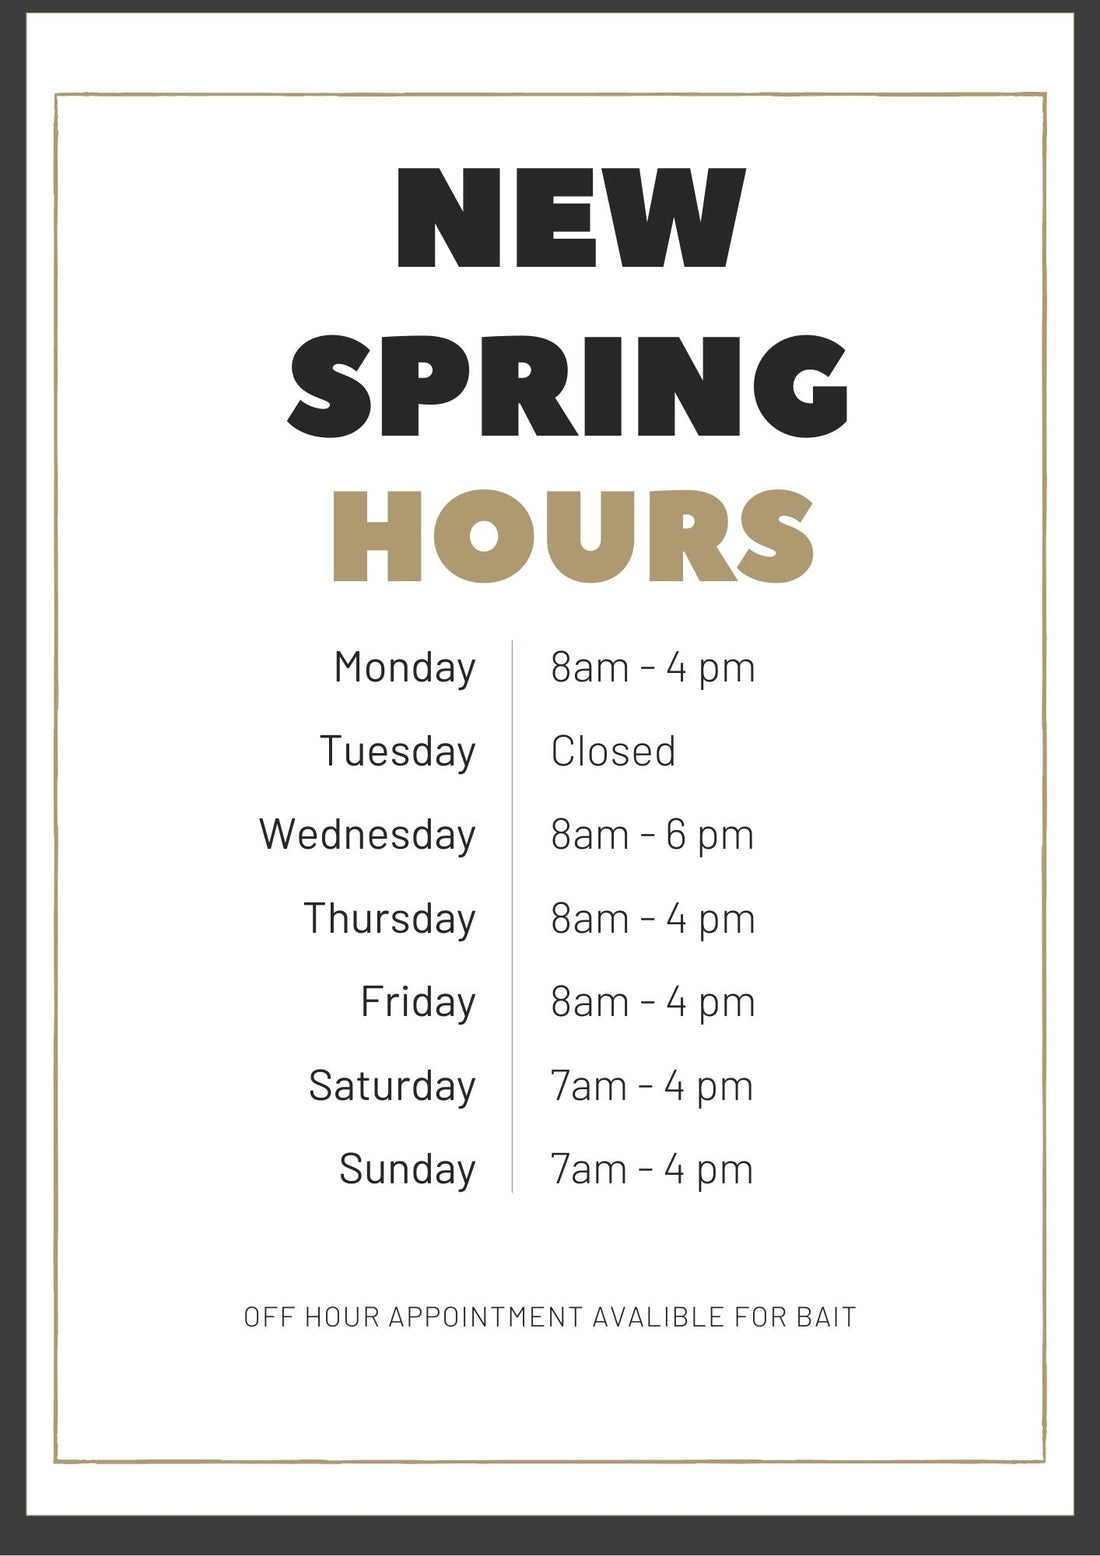 NEW SPRING HOURS